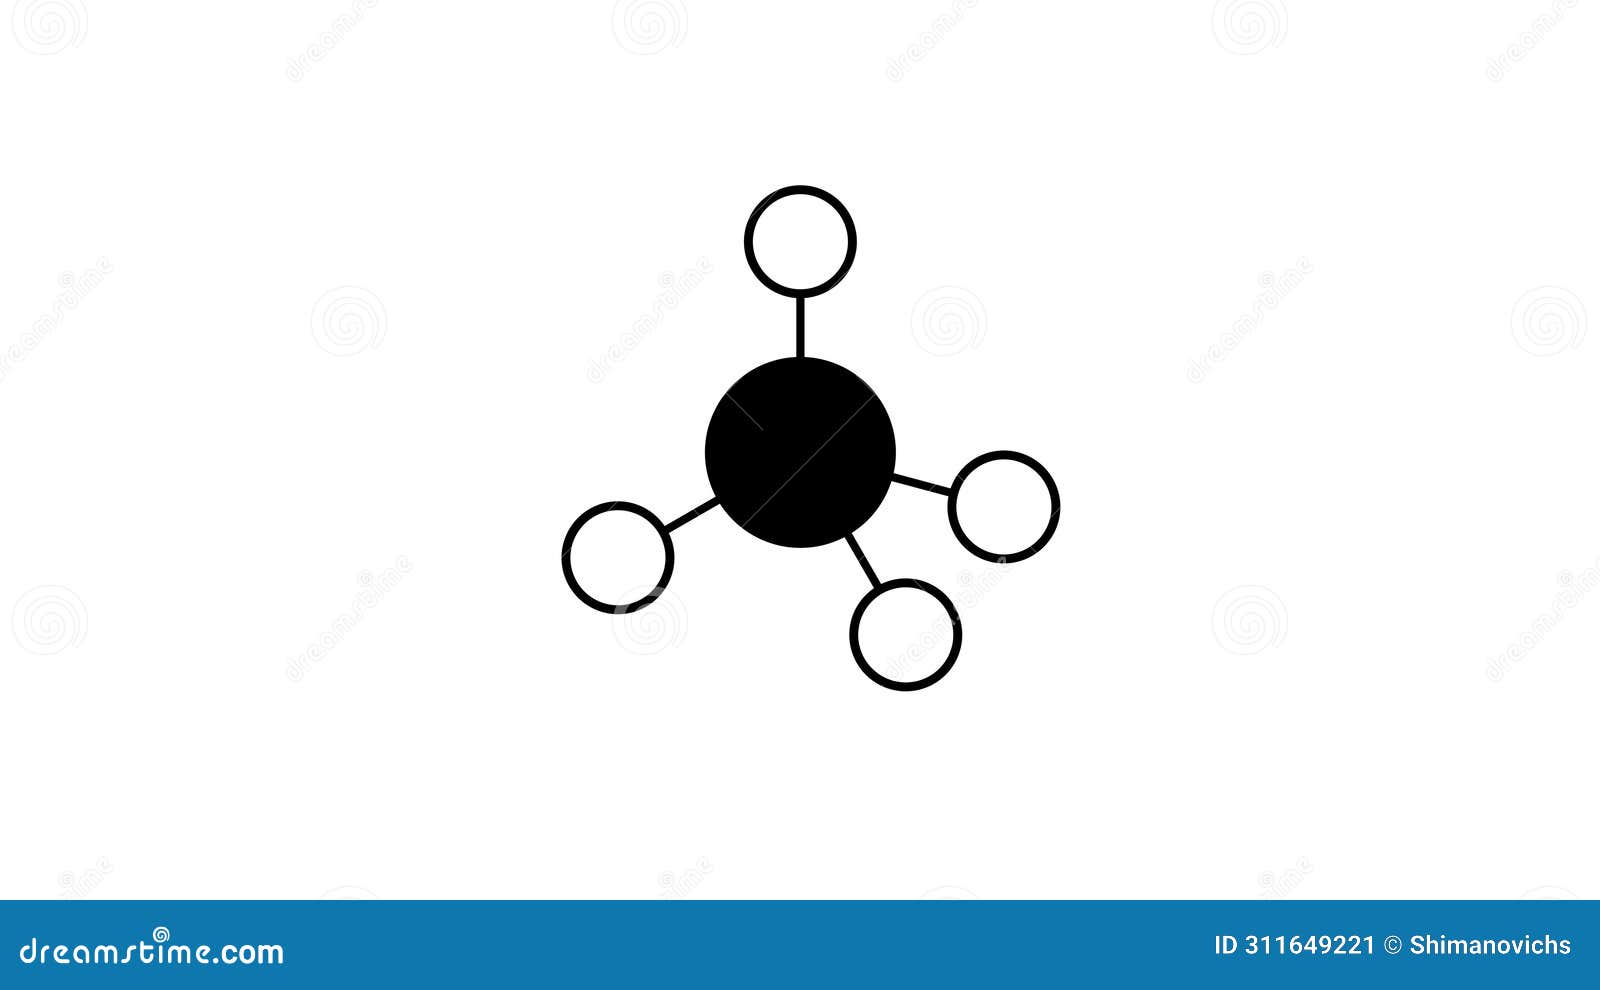 methane molecule, structural chemical formula, ball-and-stick model,  image simplest alkane